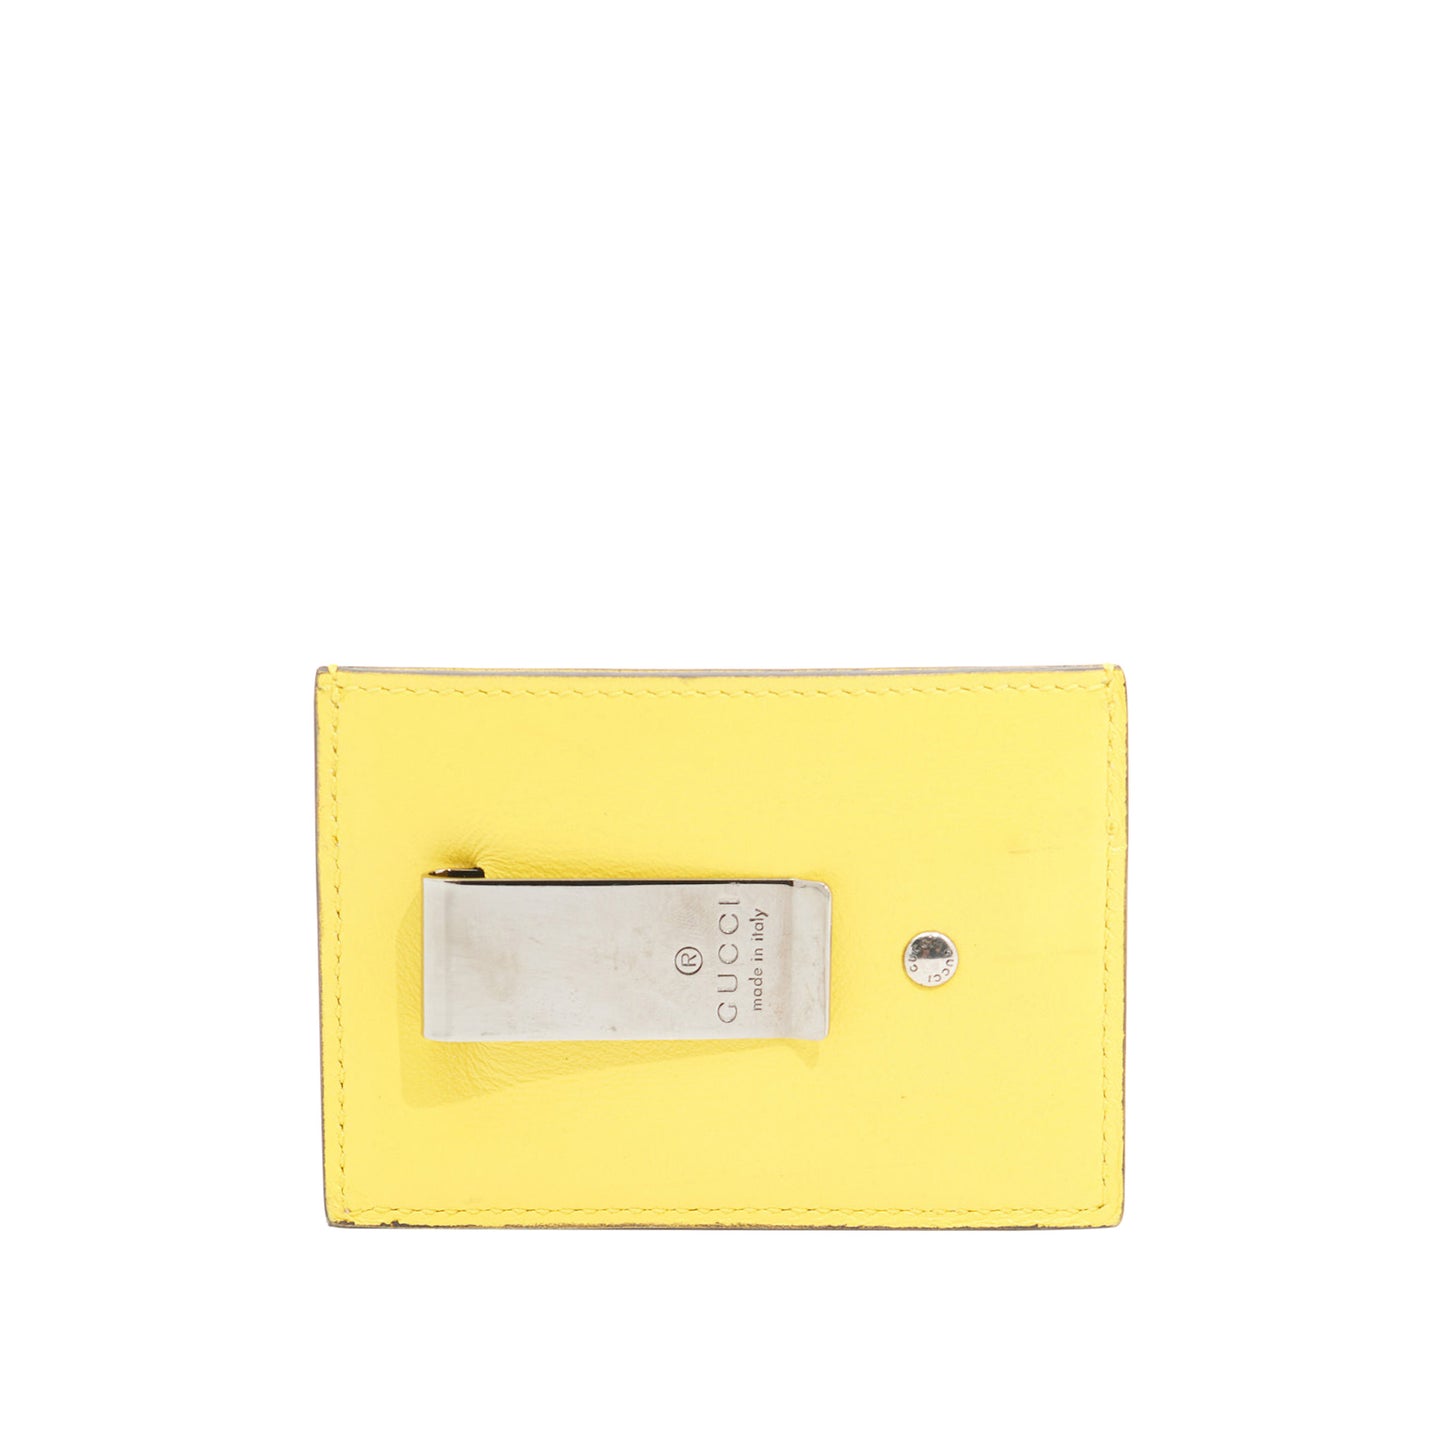 Gucci Canvas Card Wallet in Yellow